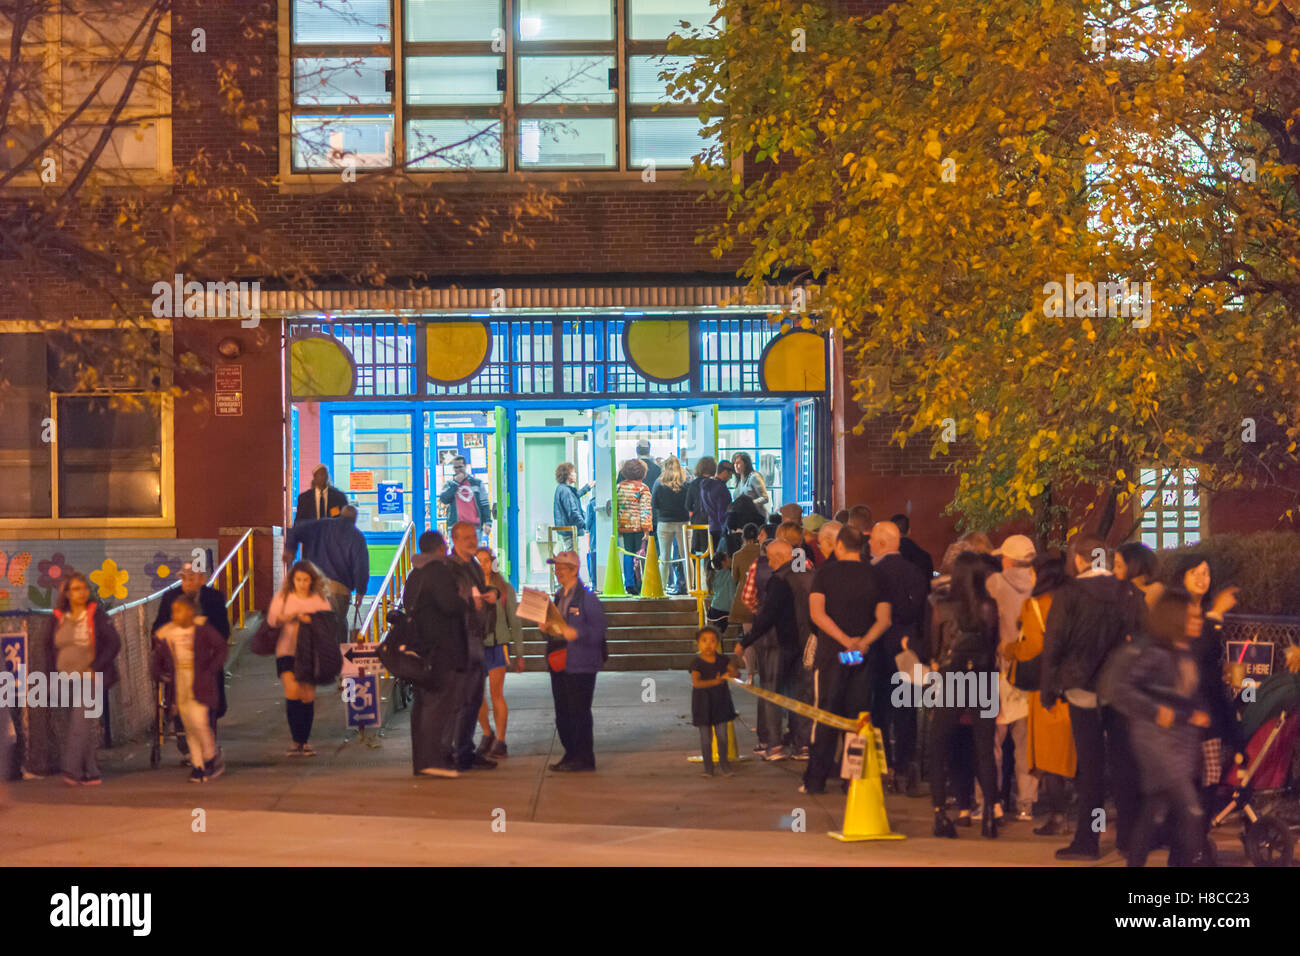 Voters enter and leave the PS33 polling station in the Chelsea neighborhood of New York on the evening of Election Day, Tuesday, November 8, 2016. (© Richard B. Levine) Stock Photo